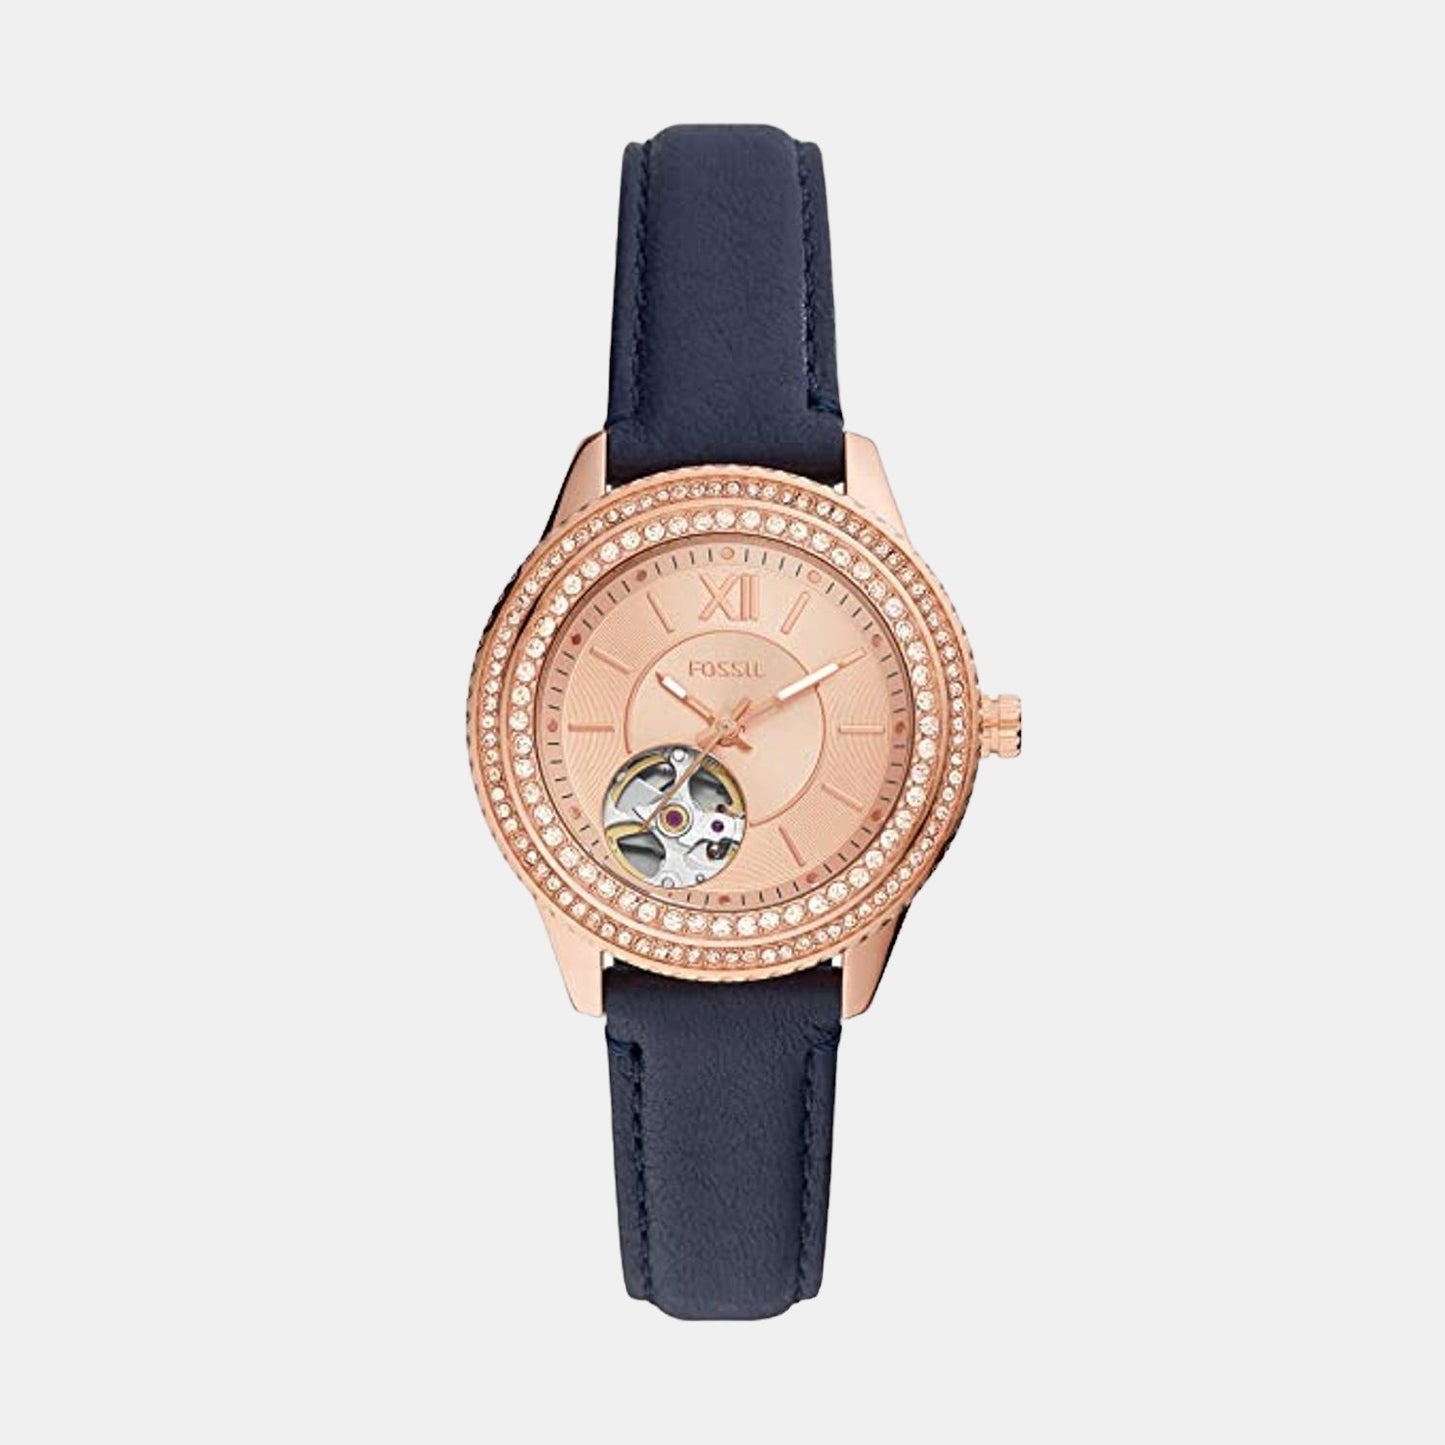 Female Rose Gold Analog Leather Automatic Watch ME3212